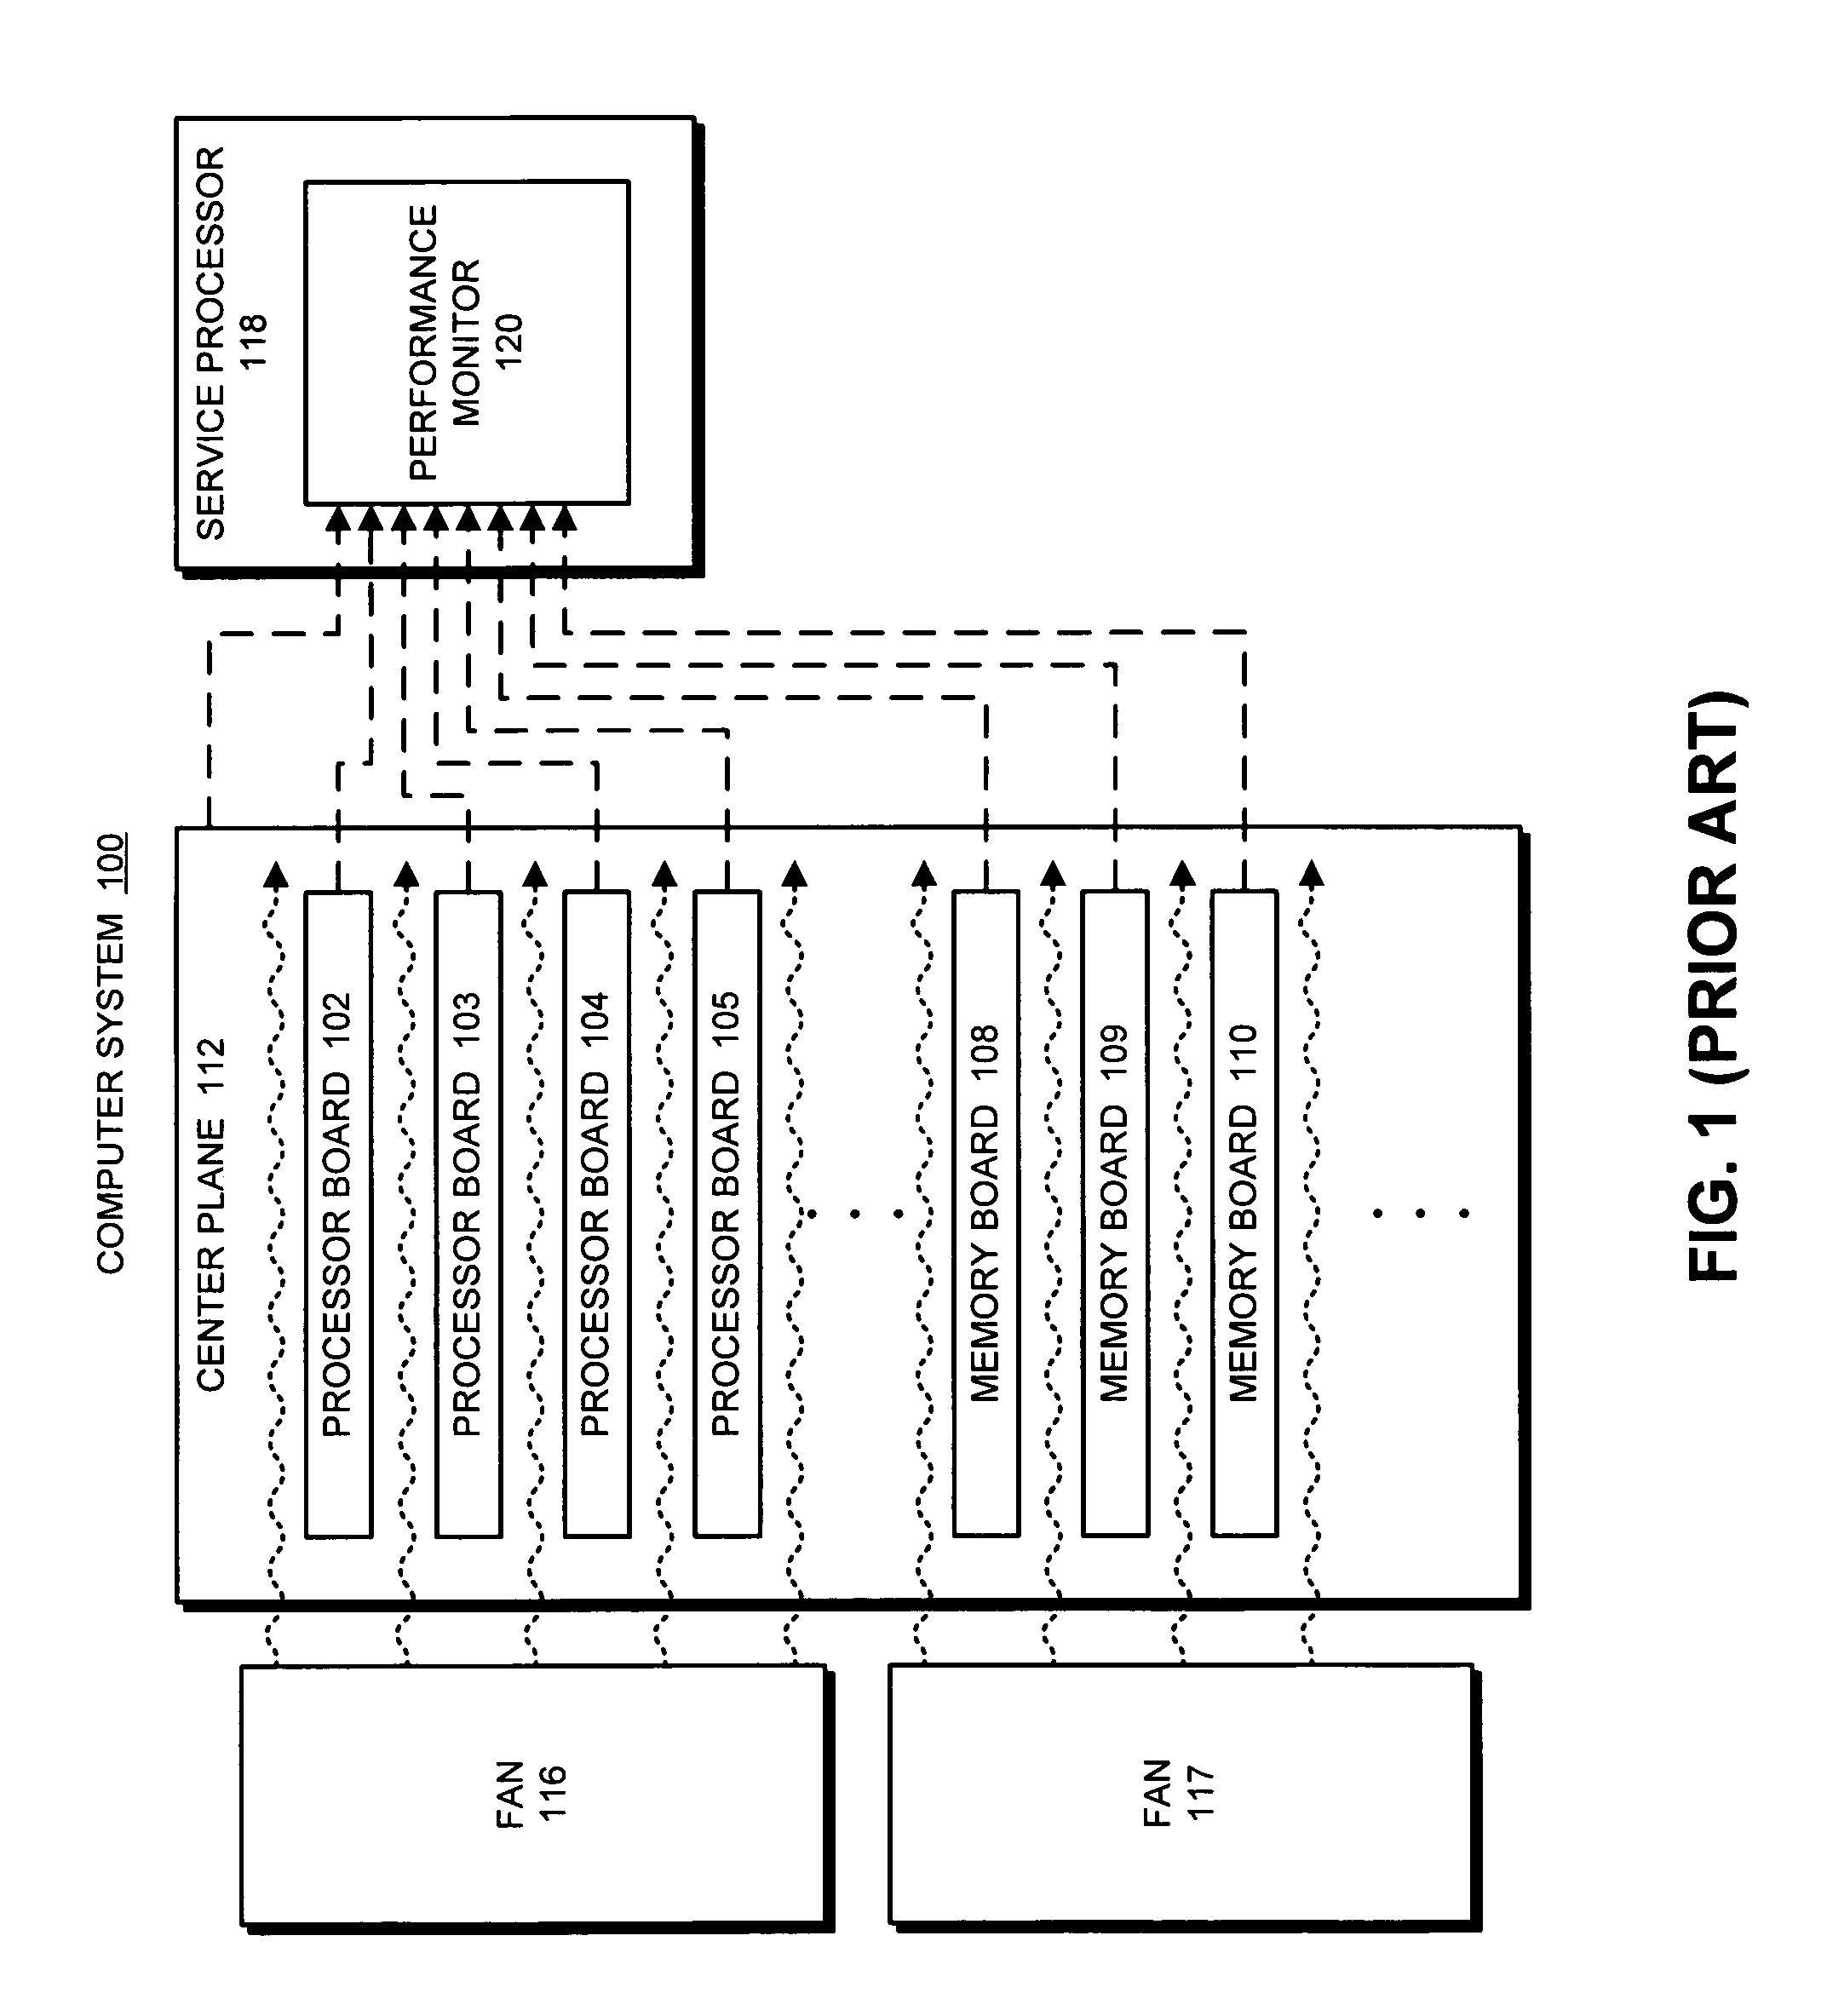 Method and apparatus for validating sensor operability in a computer system